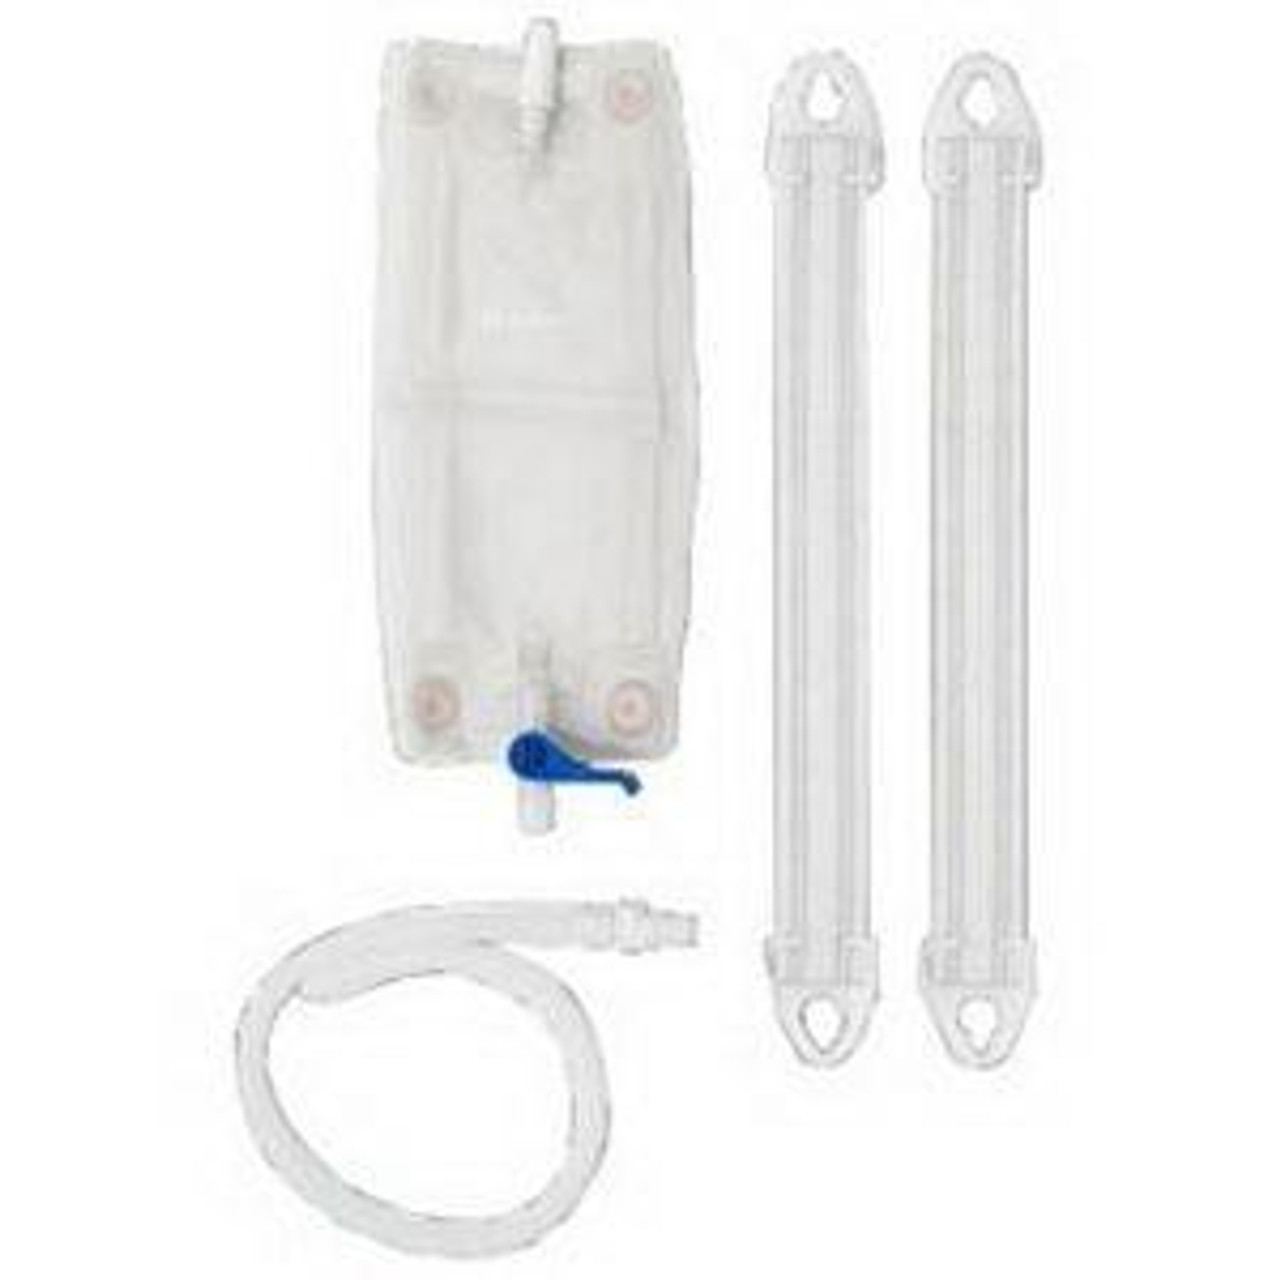 VENTED Leg Bag SYSTEM 18OZ (540ML) STERILE REPLACEMENT FOR 9845. (CS10) (HOL-9645)